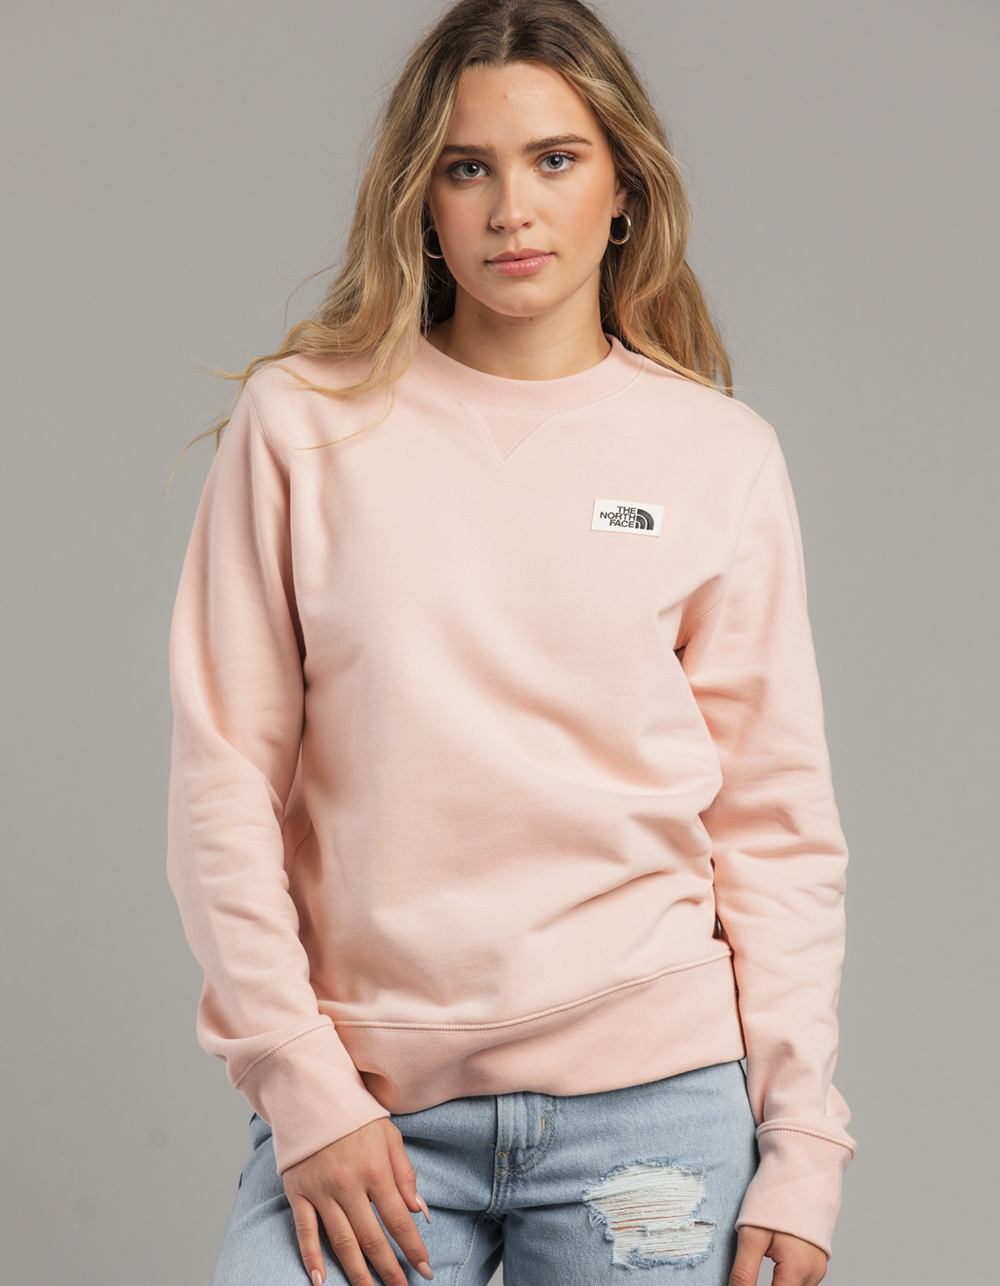 THE NORTH FACE Heritage Patch Womens Crewneck Sweatshirt - DUSTY PINK ...